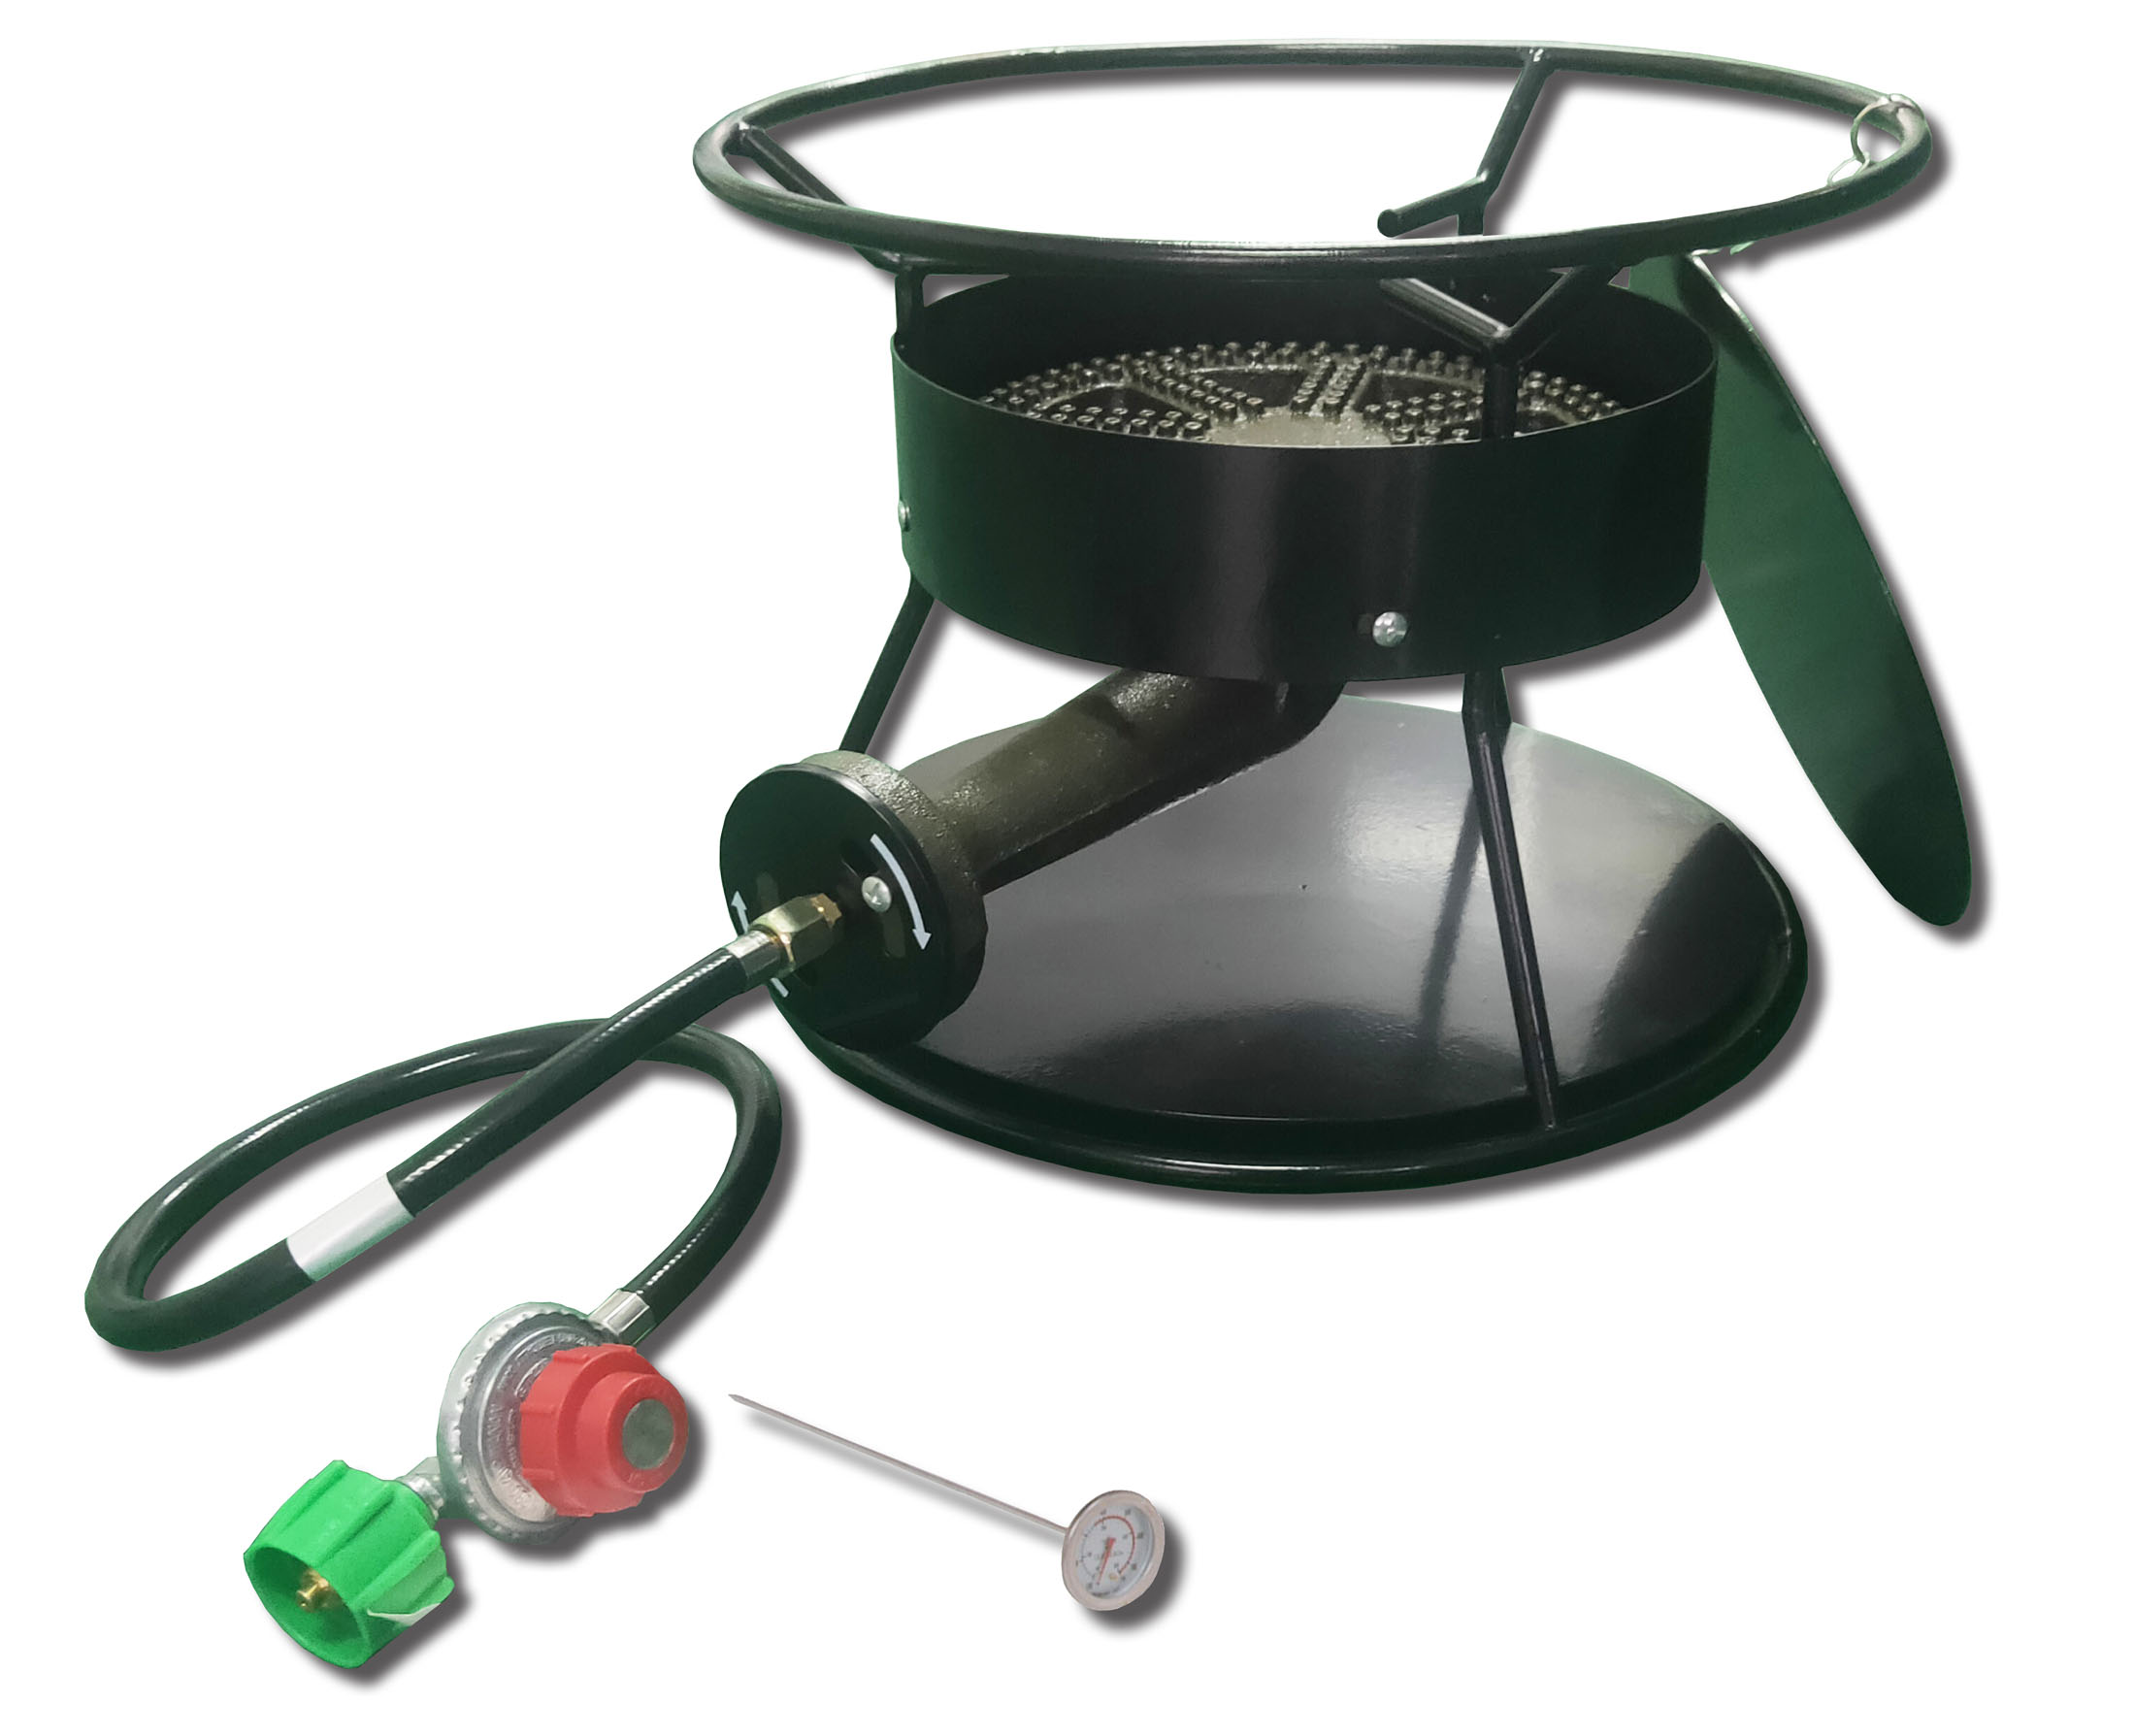 King Kooker Model # 18PKT 12” Welded Outdoor Cooker Package with Large 11” Casting - image 1 of 1